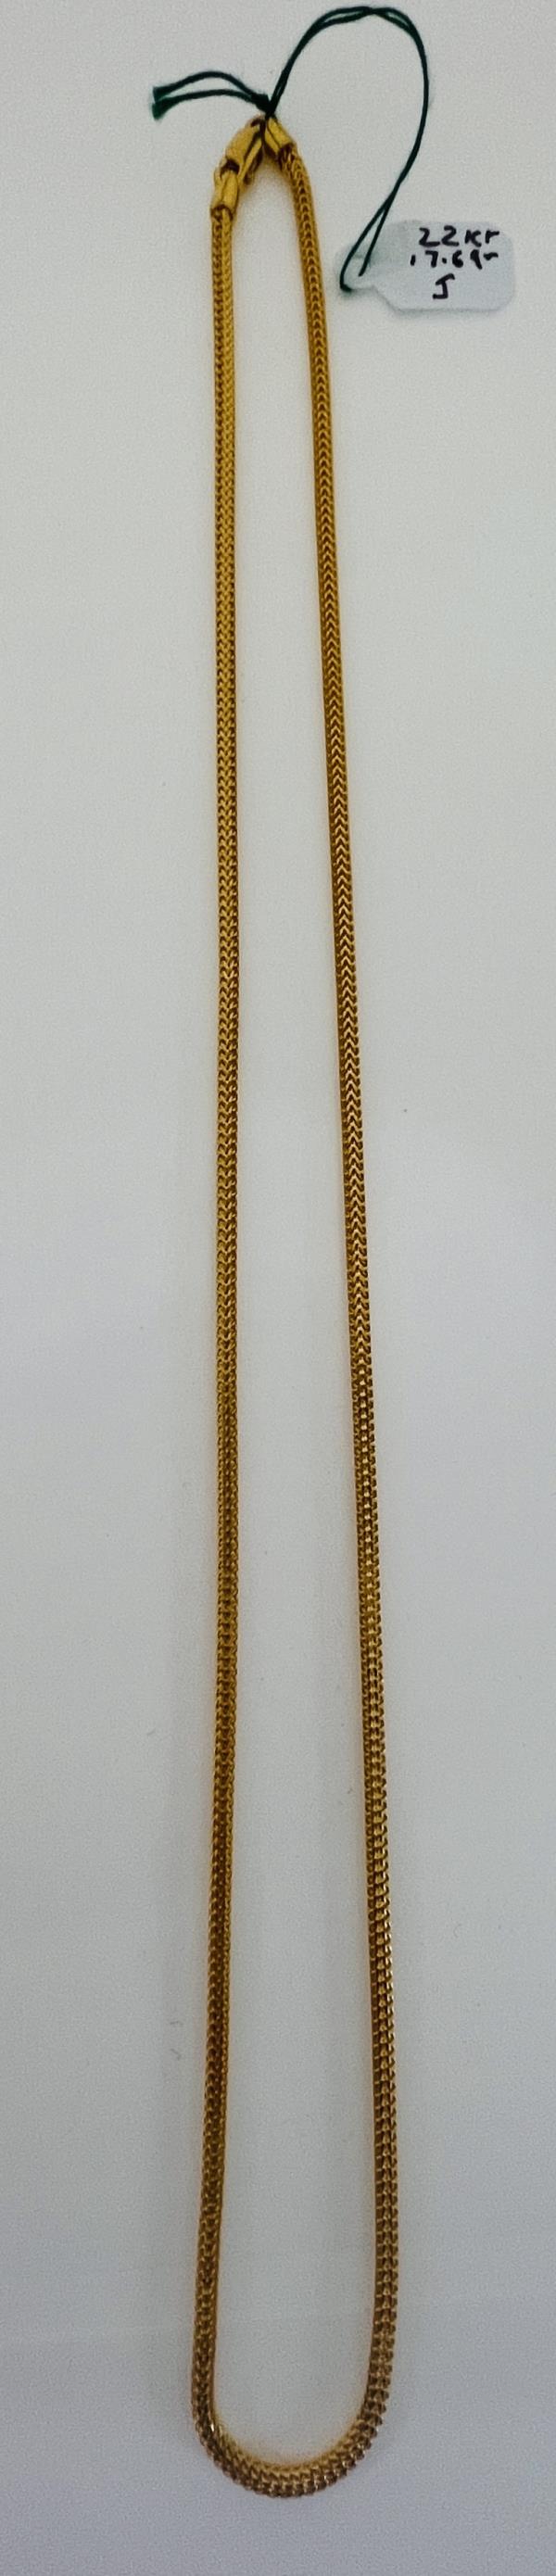 22KT GOLD CHAIN 20" 17.6GM